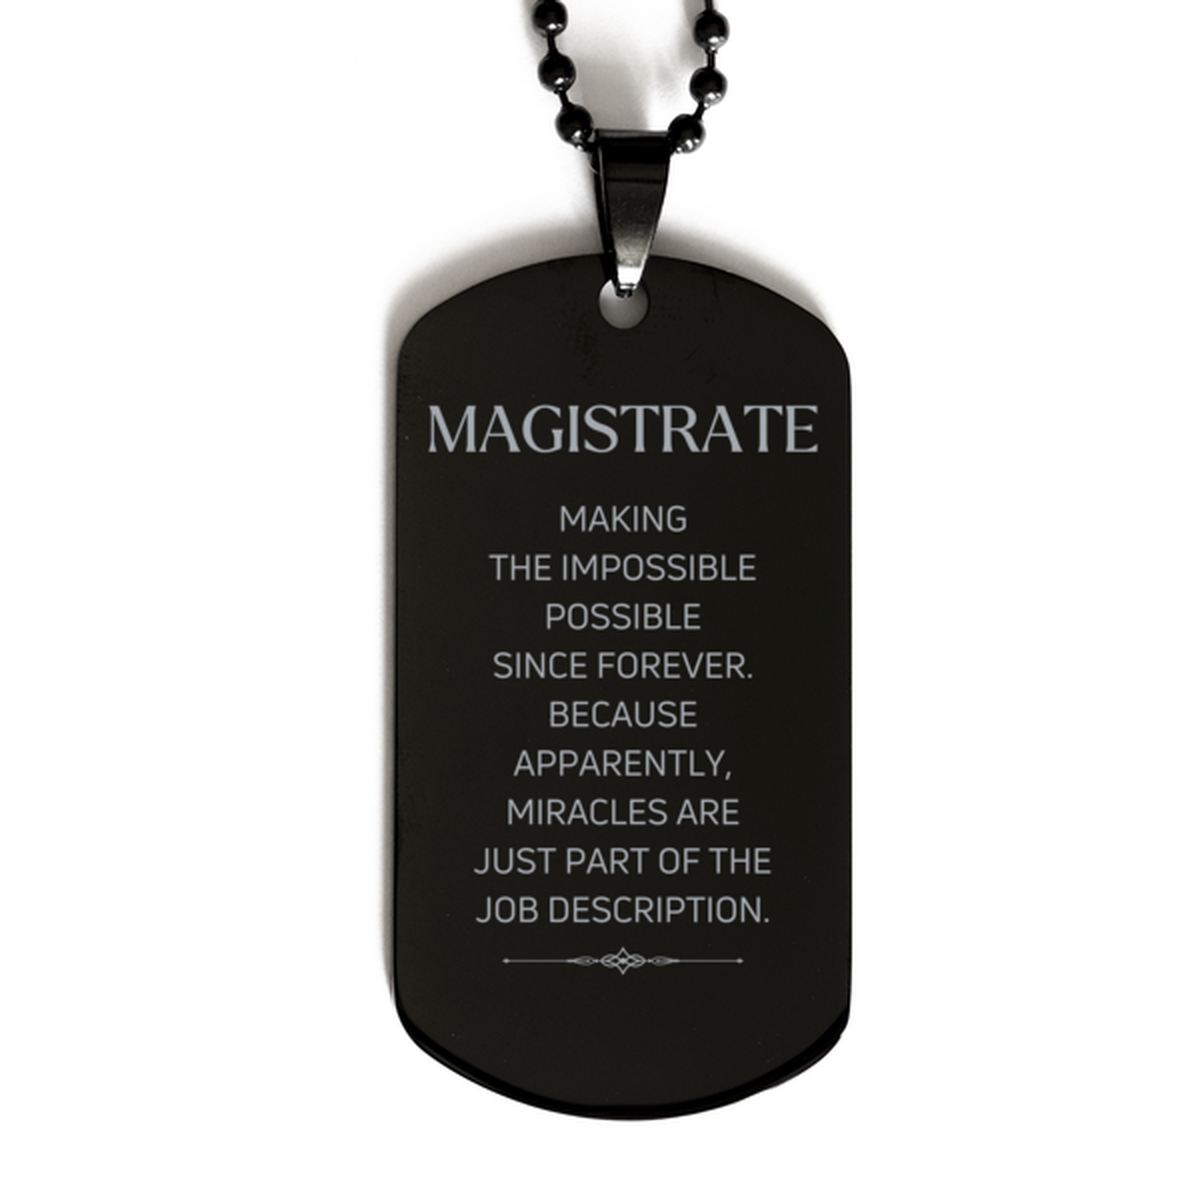 Funny Magistrate Gifts, Miracles are just part of the job description, Inspirational Birthday Black Dog Tag For Magistrate, Men, Women, Coworkers, Friends, Boss